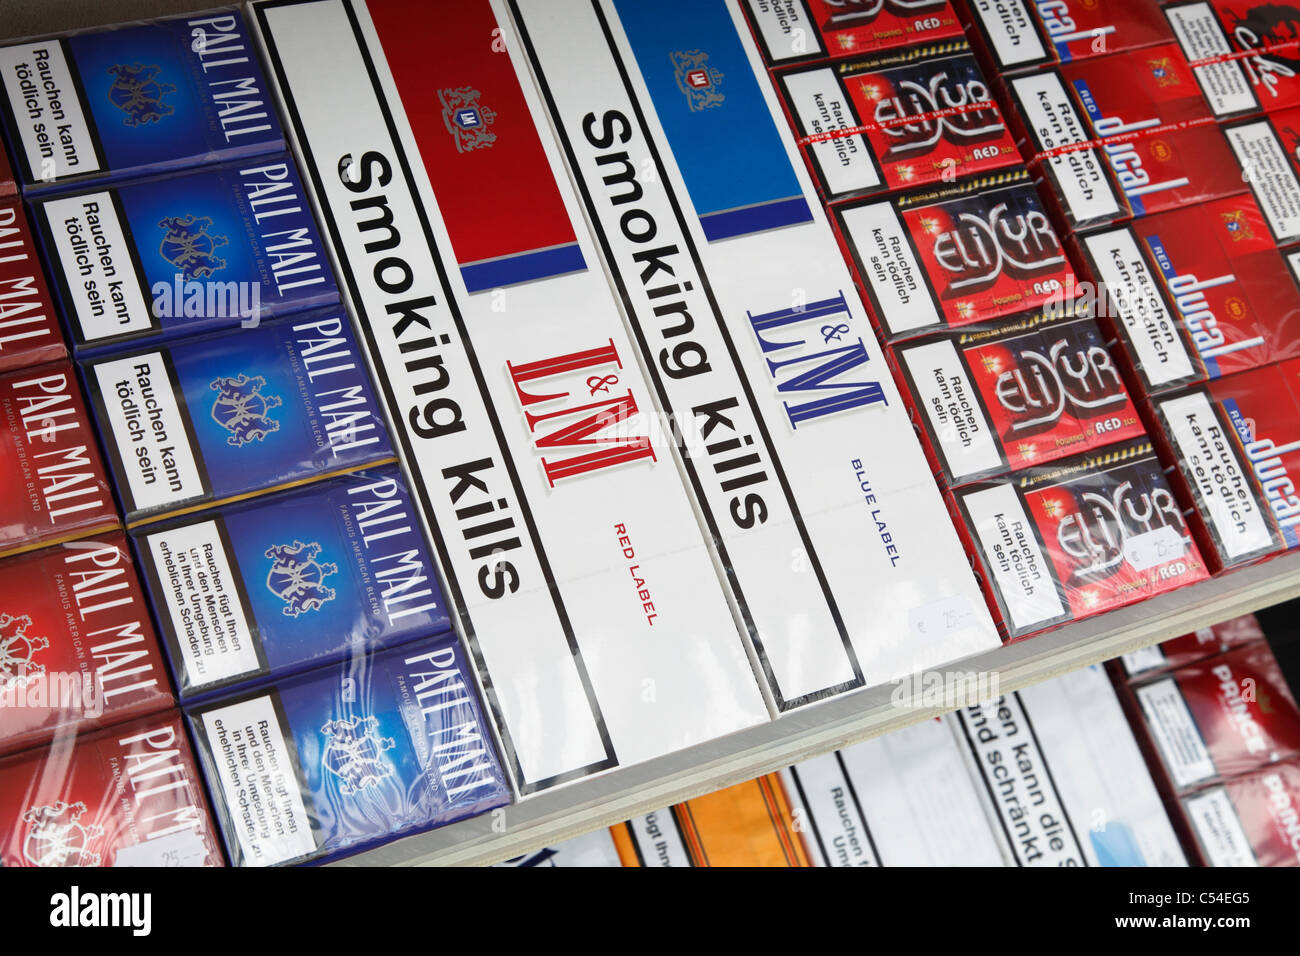 warning 'smoking kills' on cigarette packs in a duty free shop on Island Helgoland Stock Photo